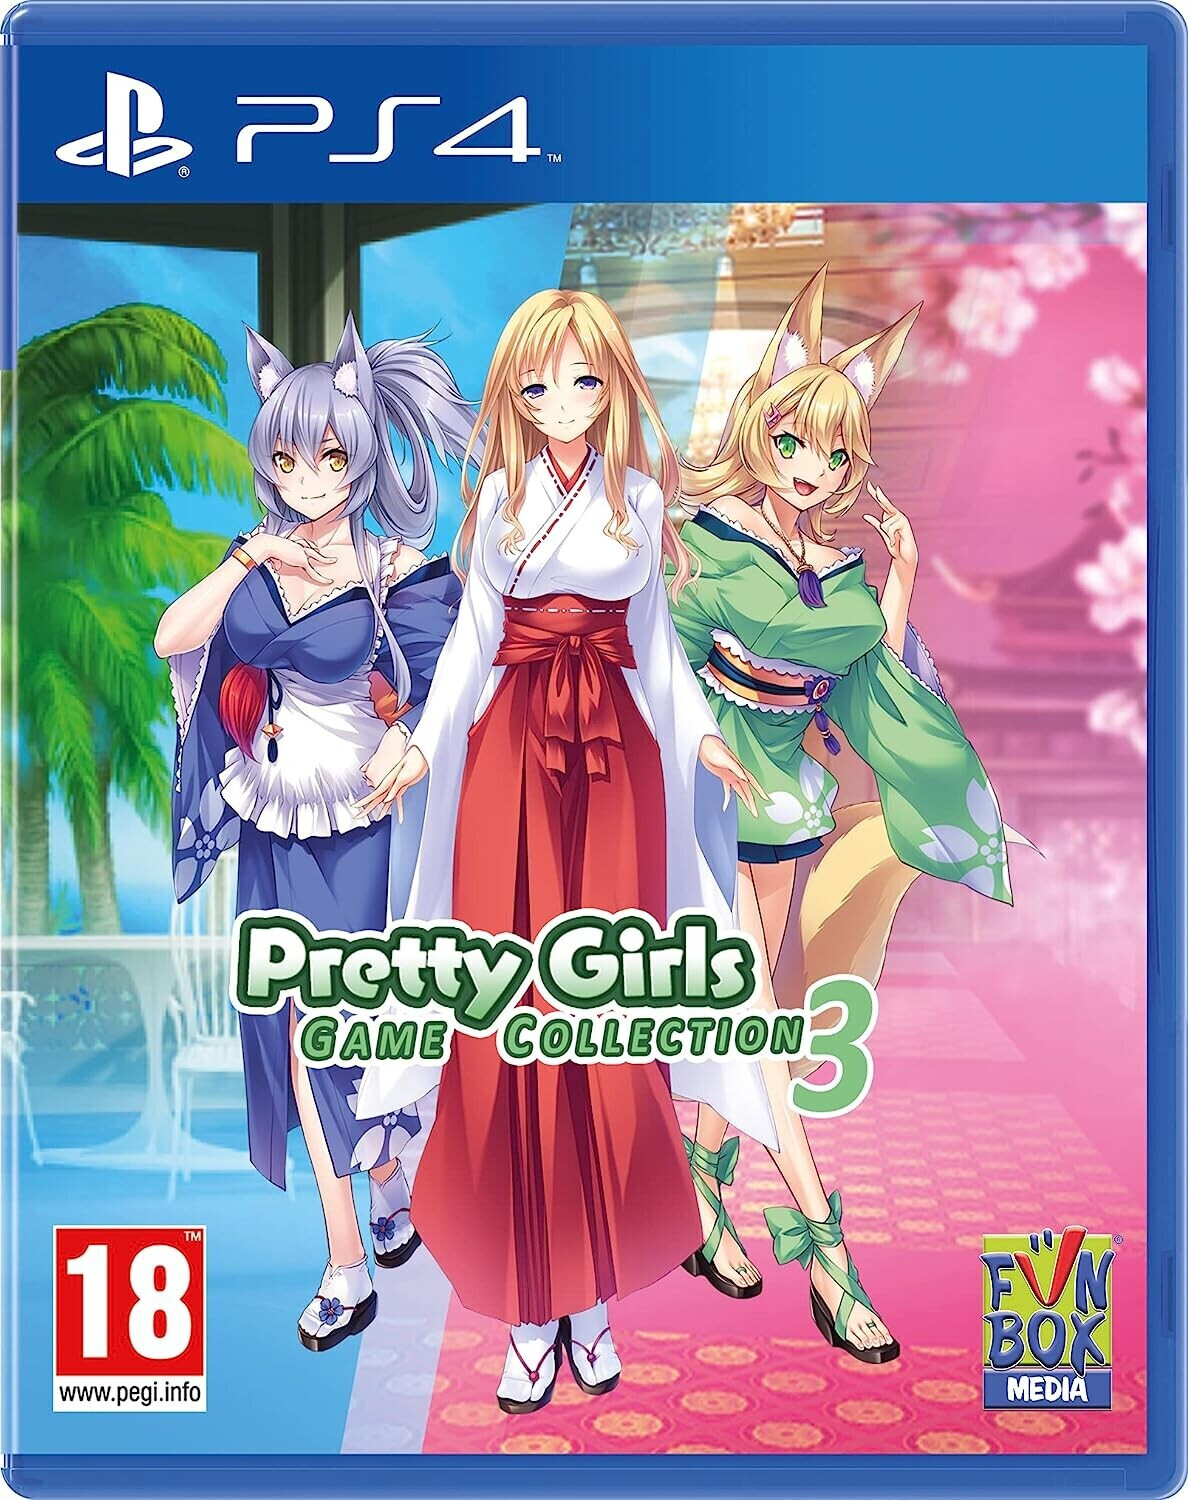 Photos - Game Funbox Media Pretty Girls:  Collection 2  (PS4)